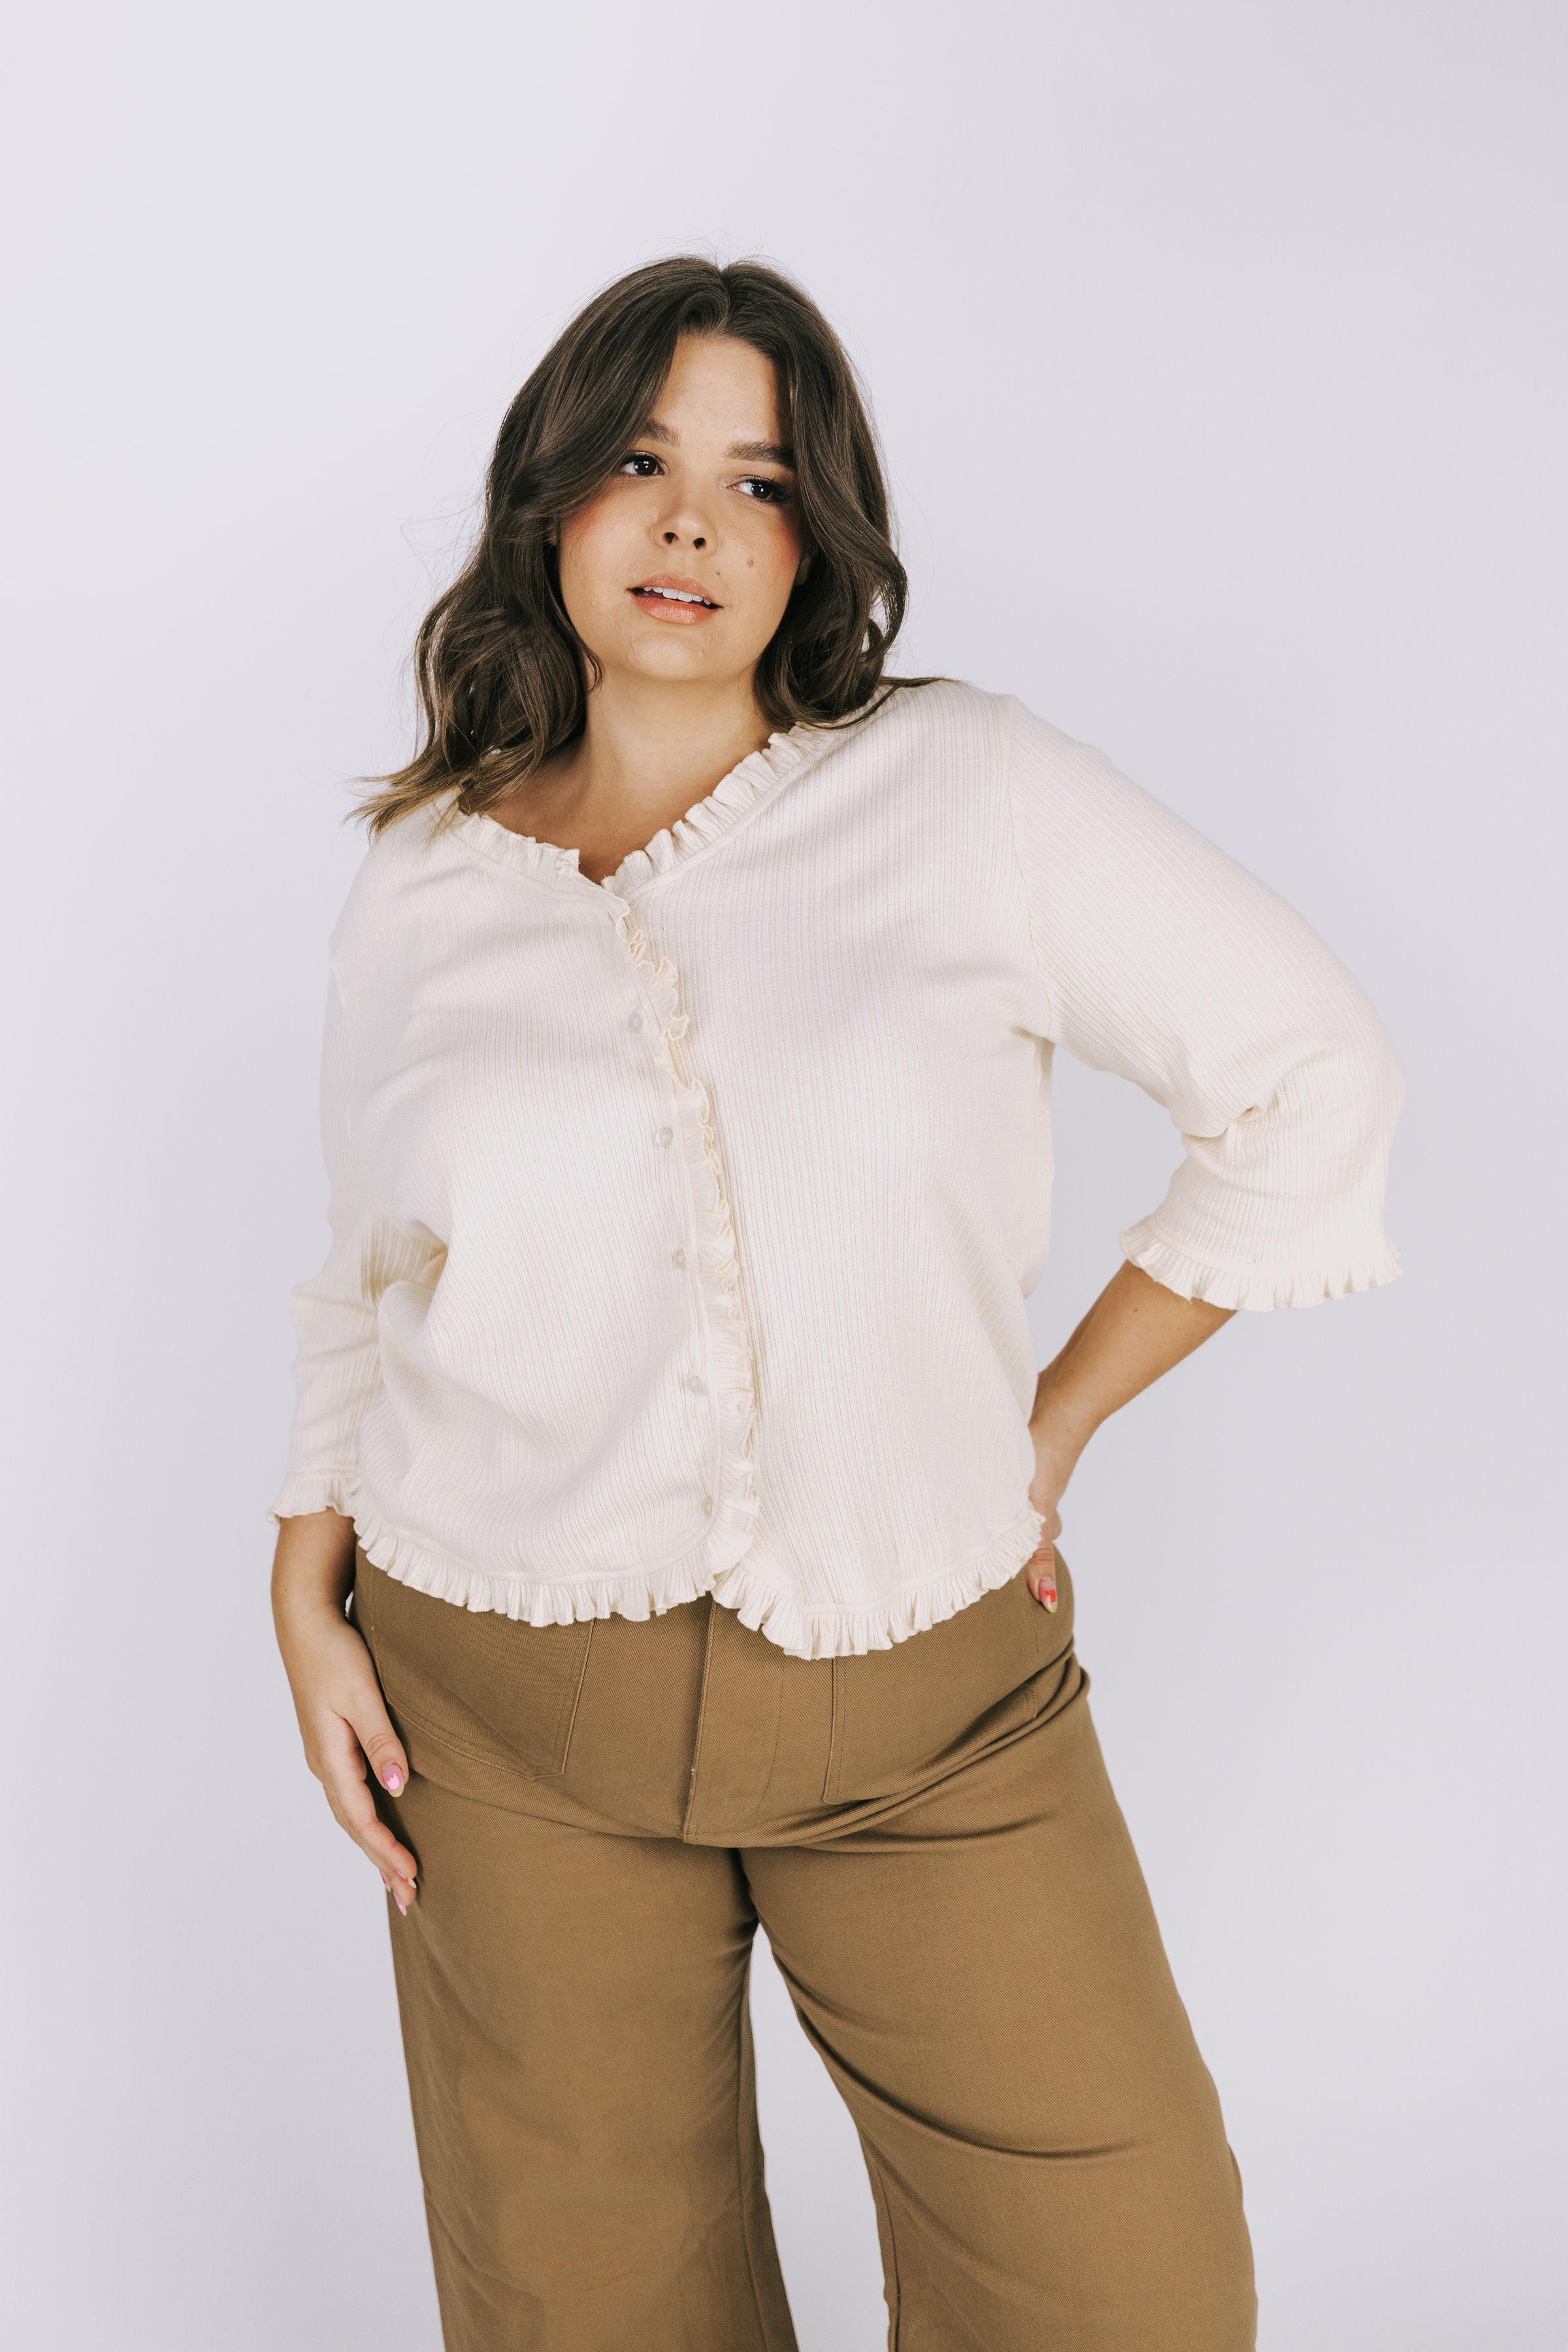 PLUS SIZE - Beyond Words Top